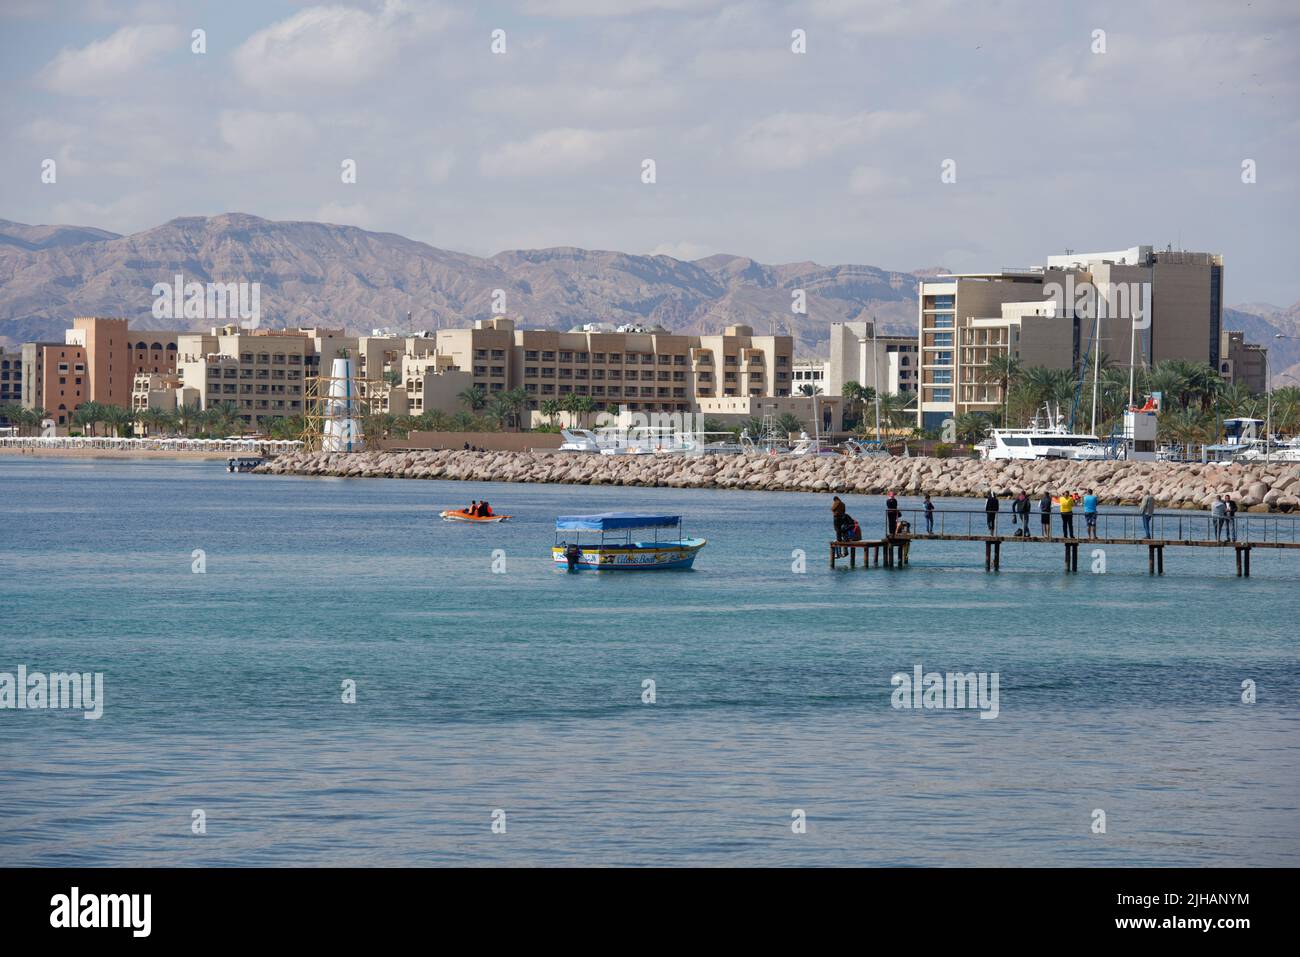 Aqaba, Jordan - March 14, 2014: People on the pier against marina and new hotels of North beach Stock Photo